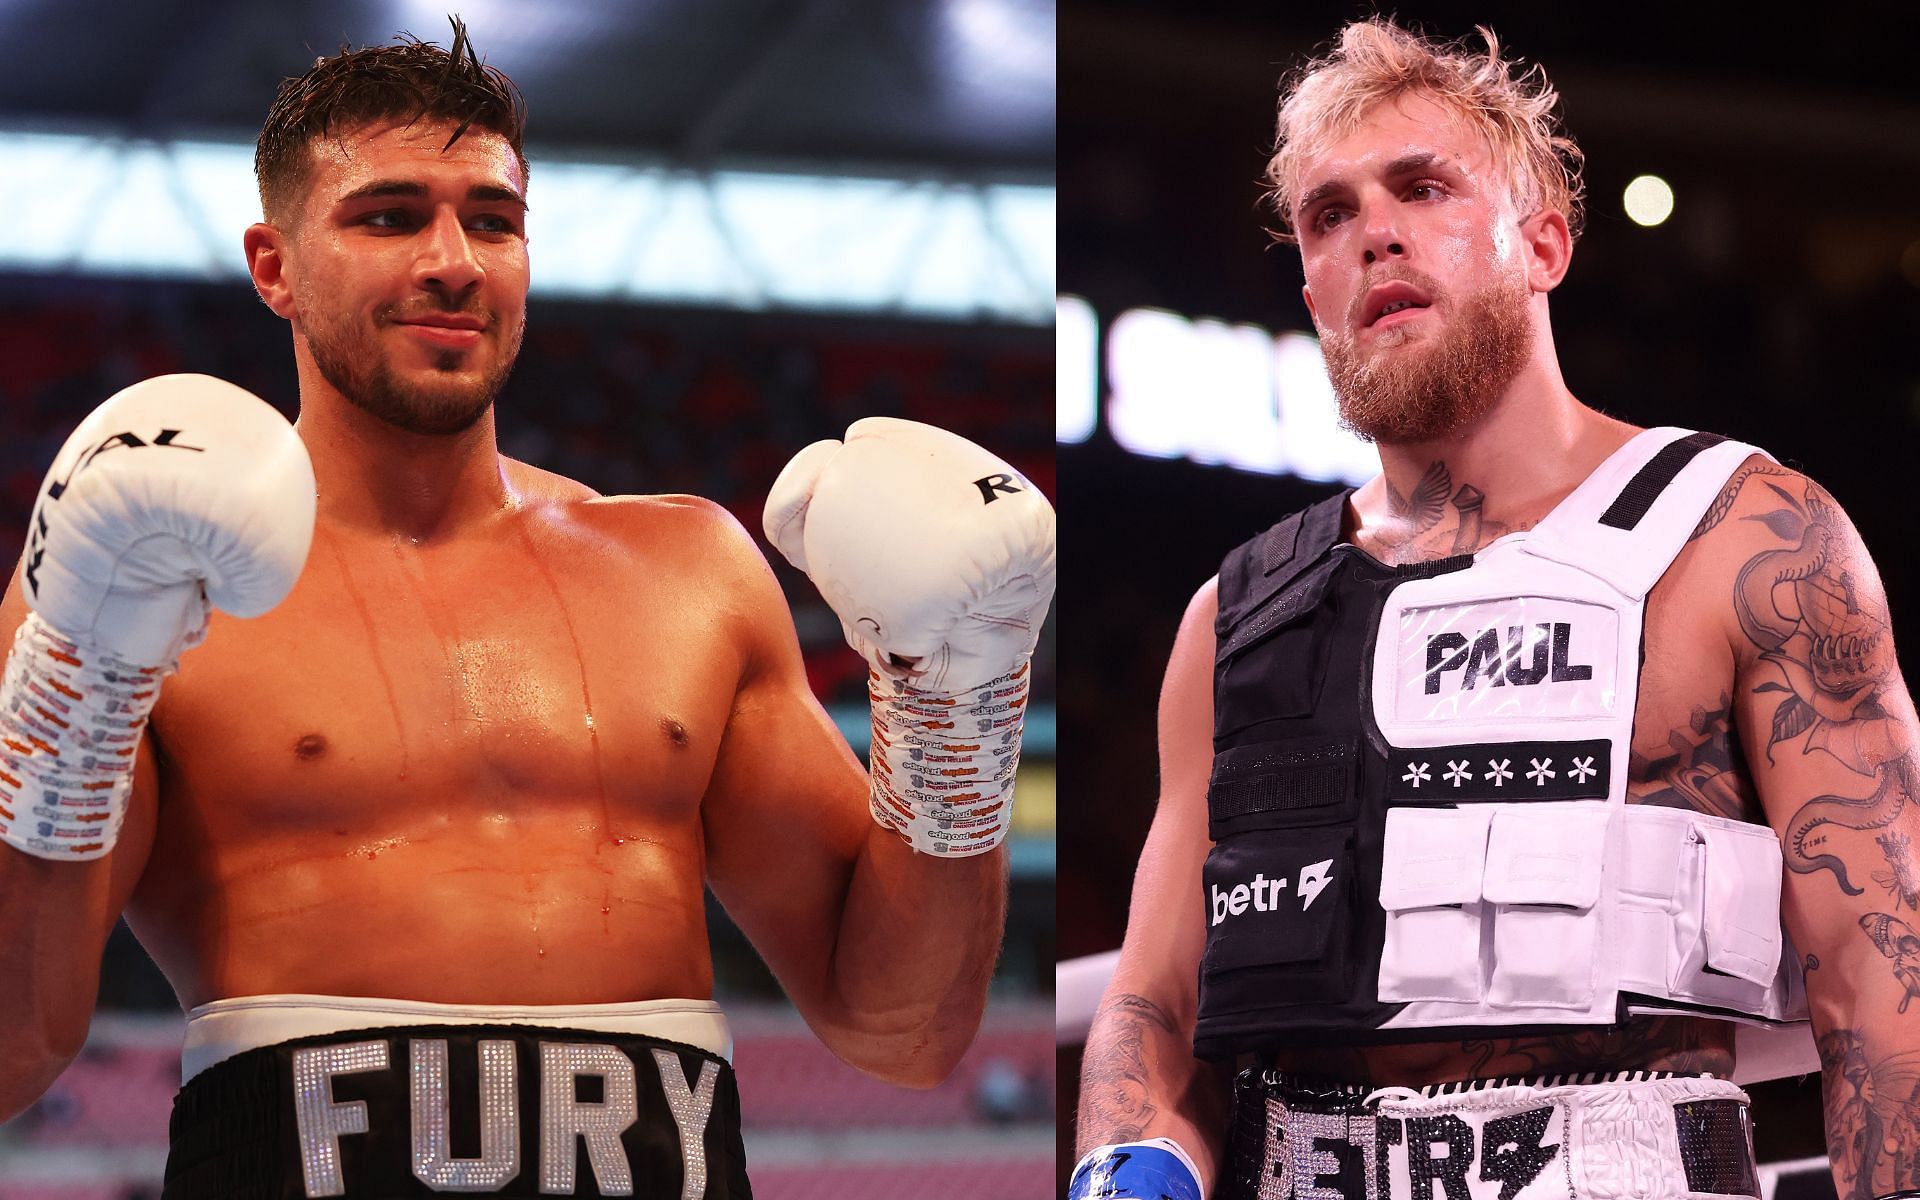 Tommy Fury (left) and Jake Paul (right) [Images courtesy: Getty Images]